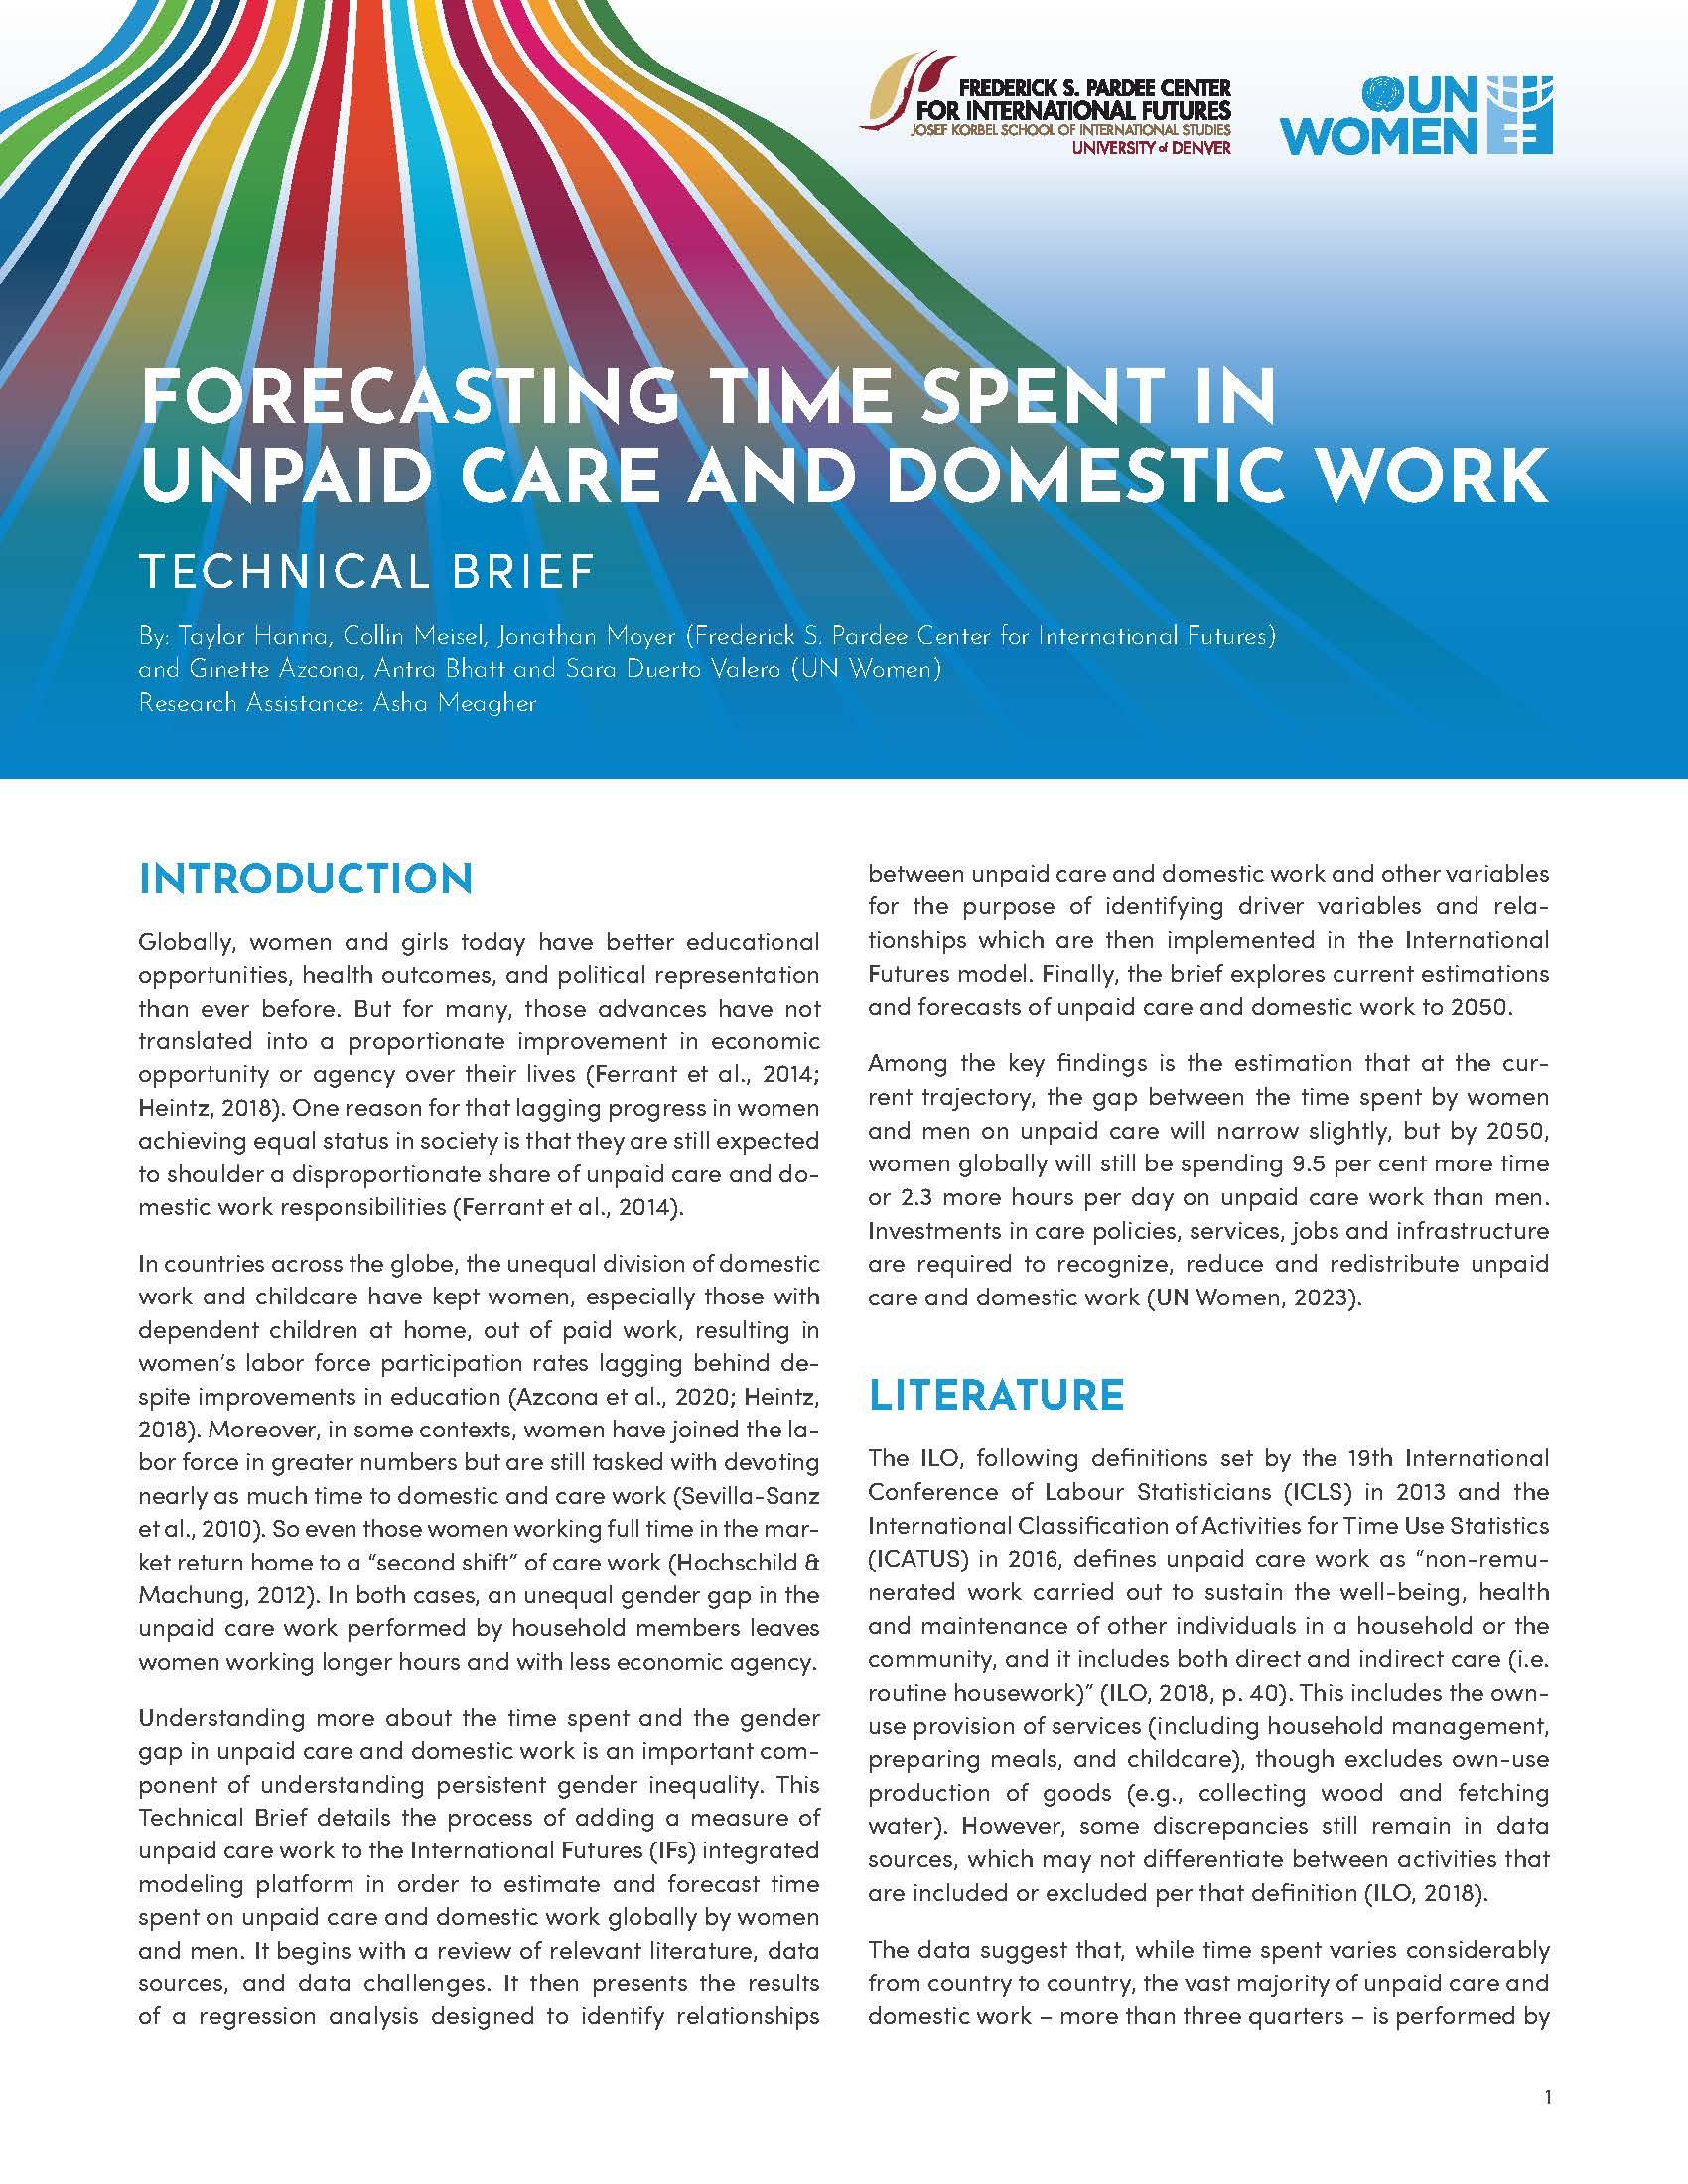 Forecasting time spent in unpaid care and domestic work